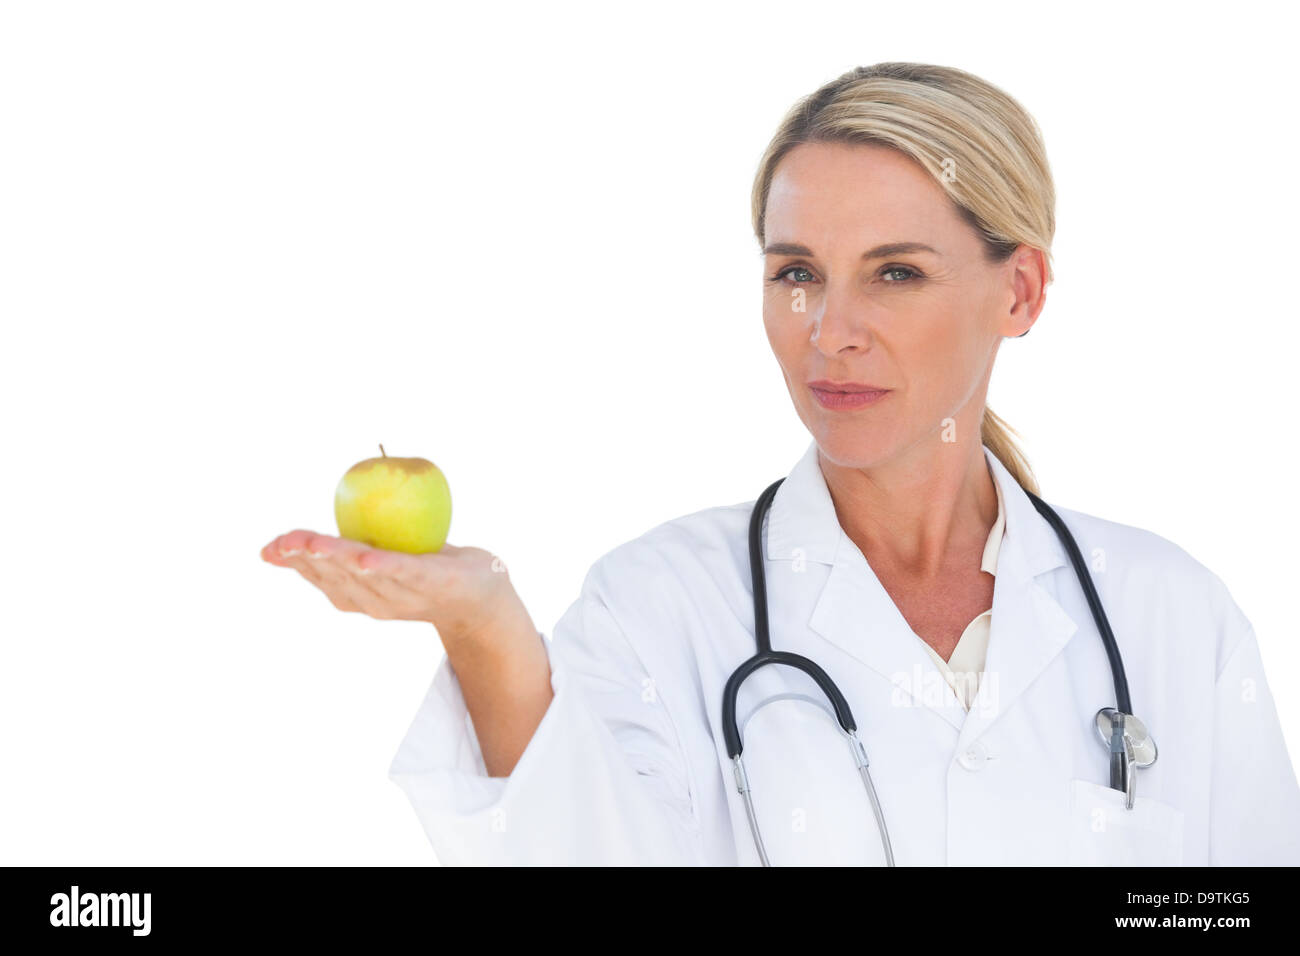 Smiling doctor holding apple and looking at camera Banque D'Images